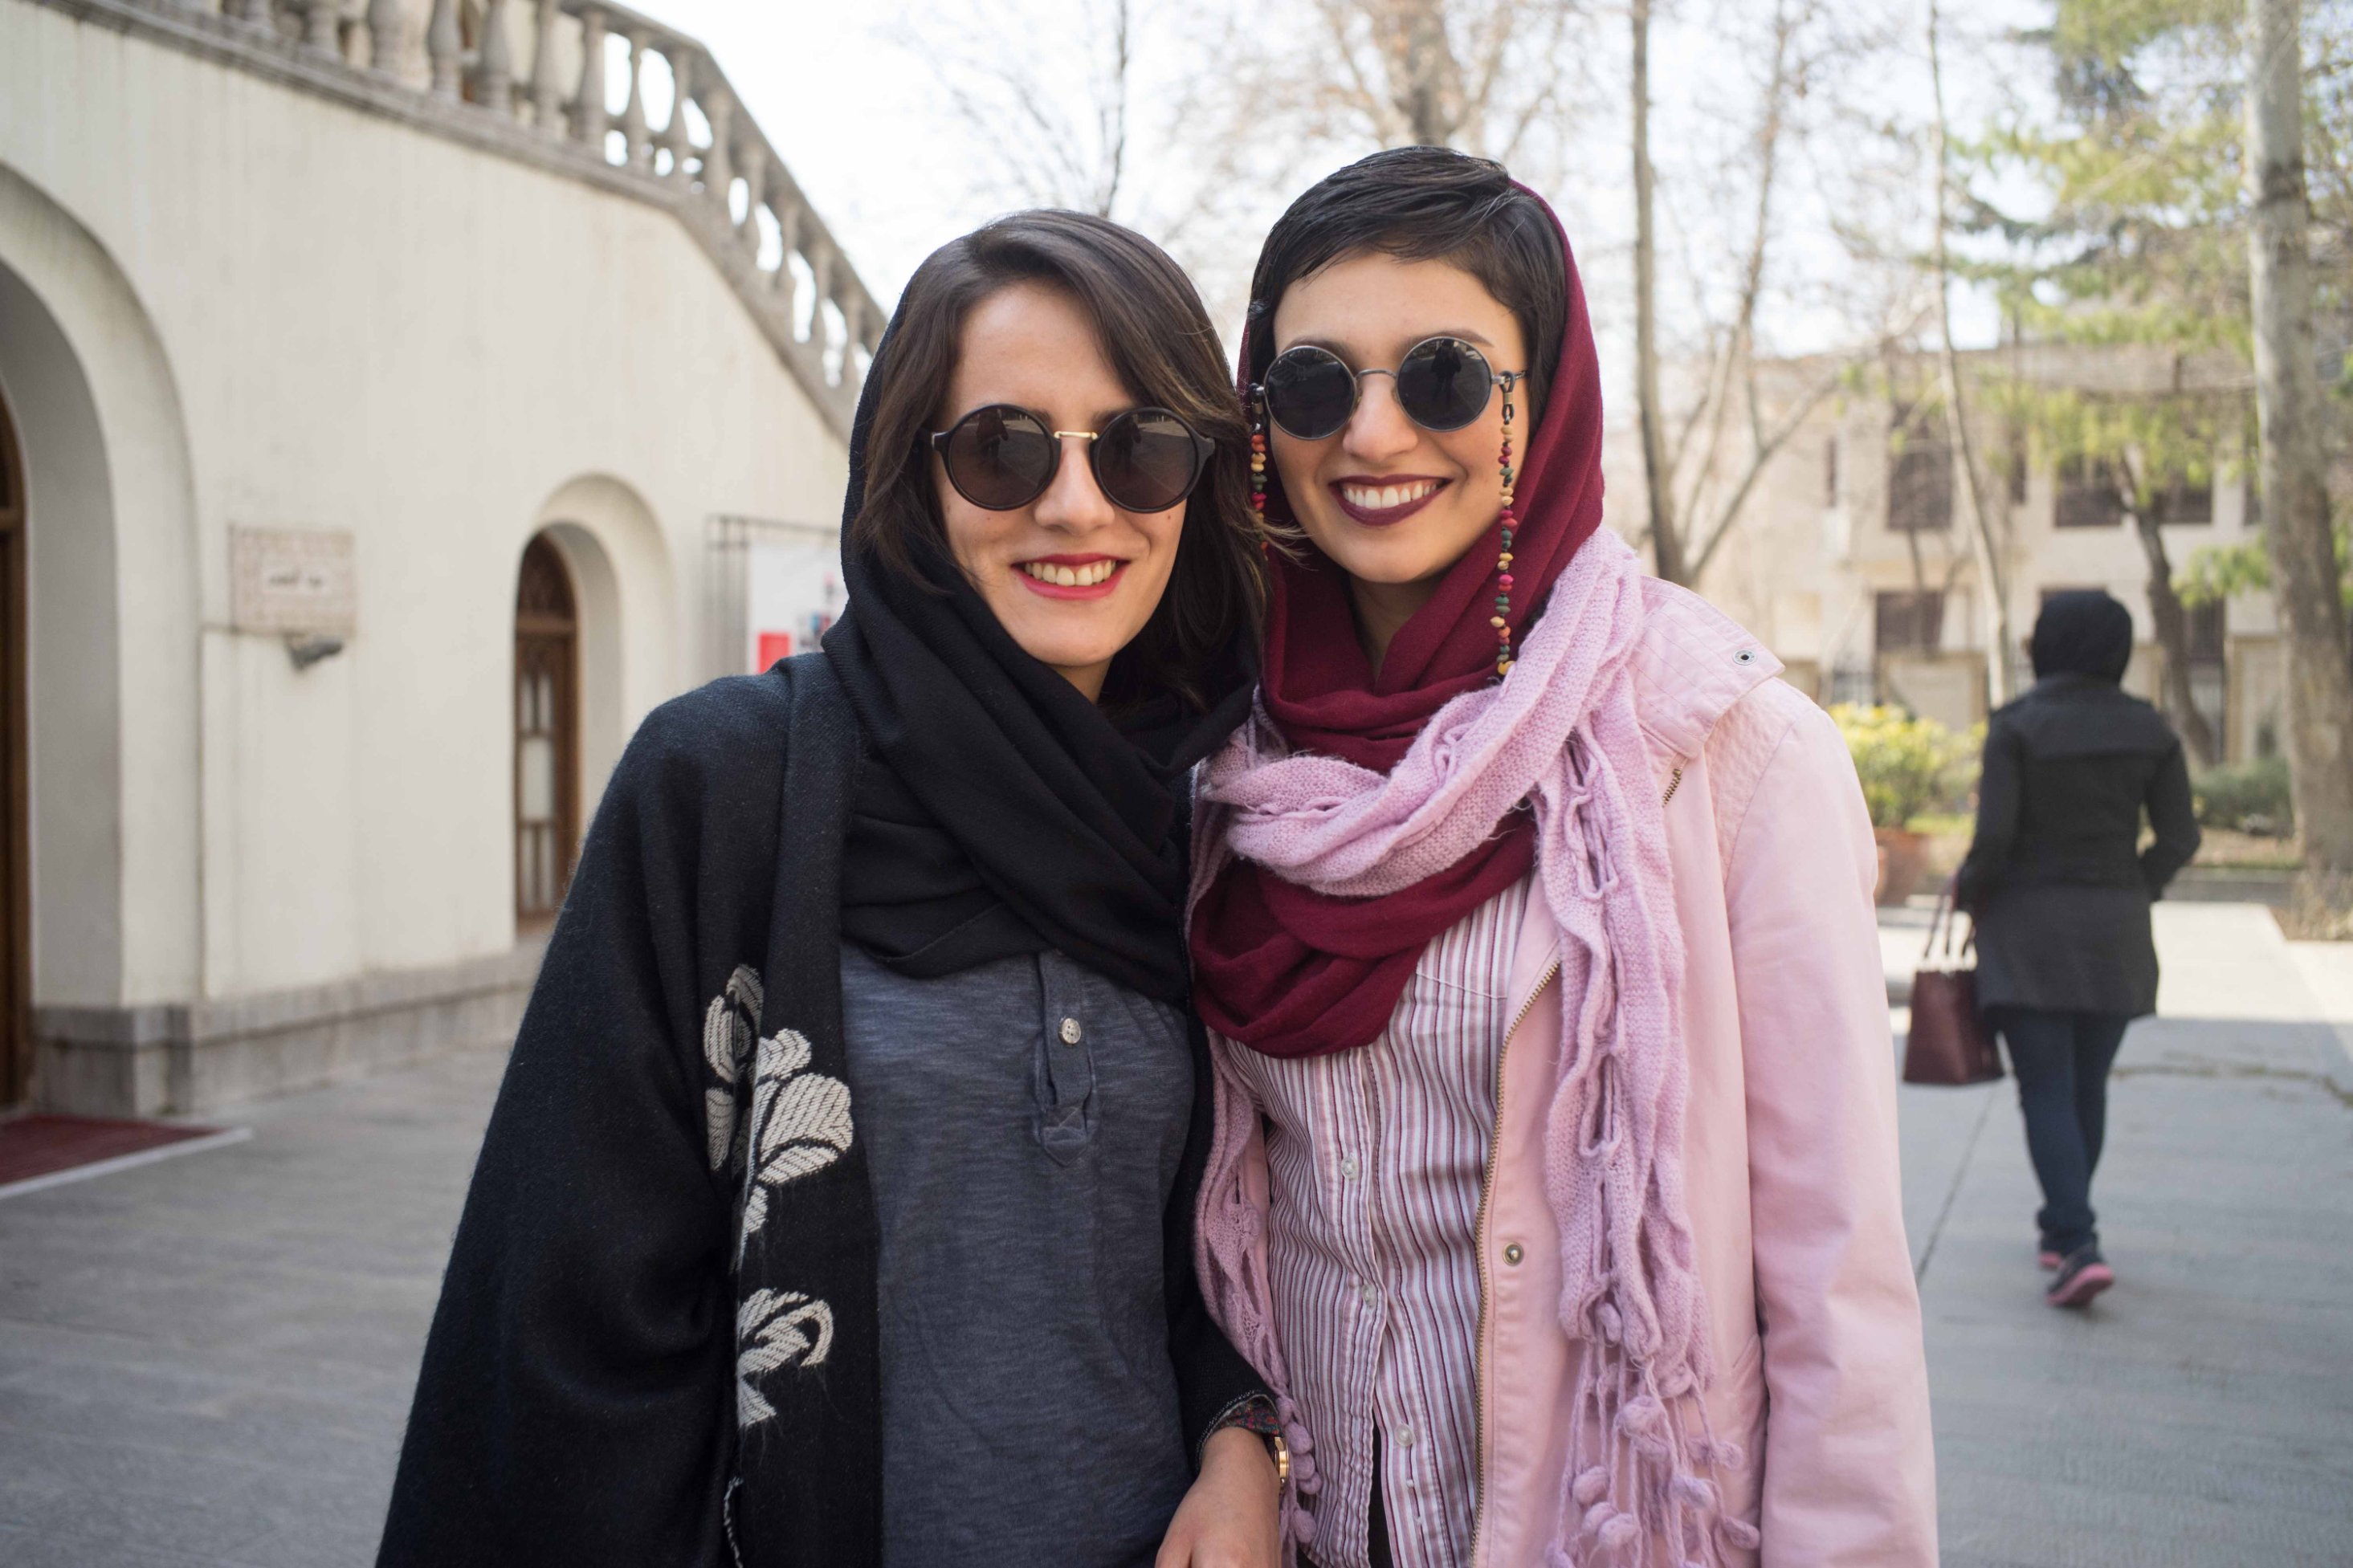 Tehran S Teens Say Iran S Not What You Think It Is Cnn